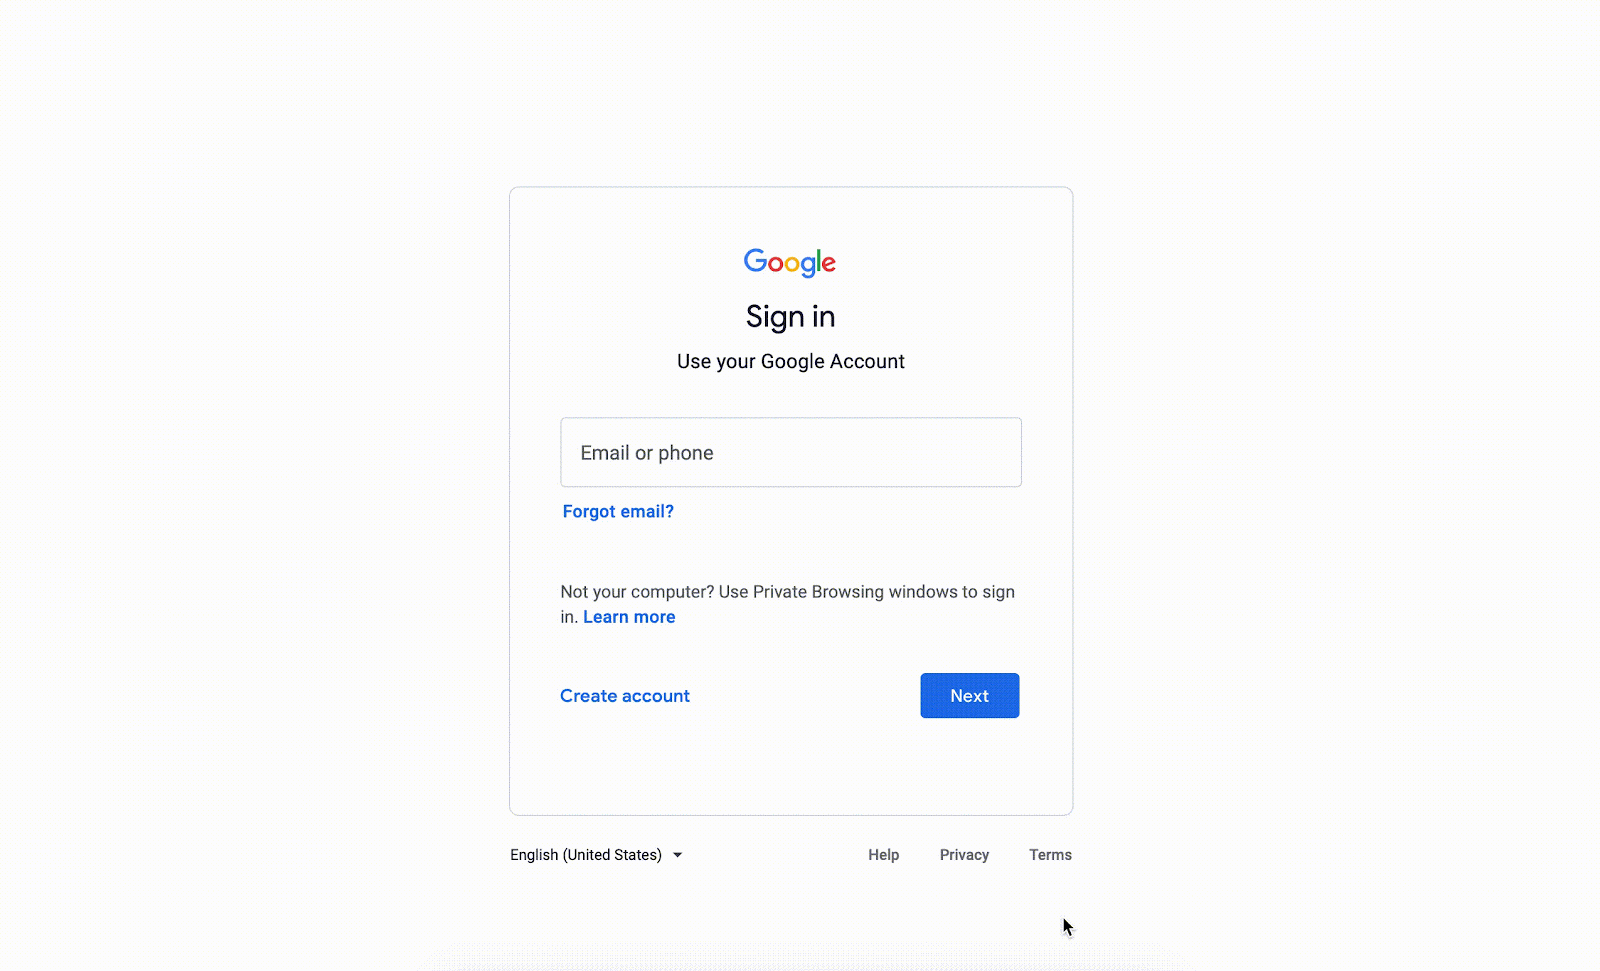 Imagery depicts the sign in page for Google.